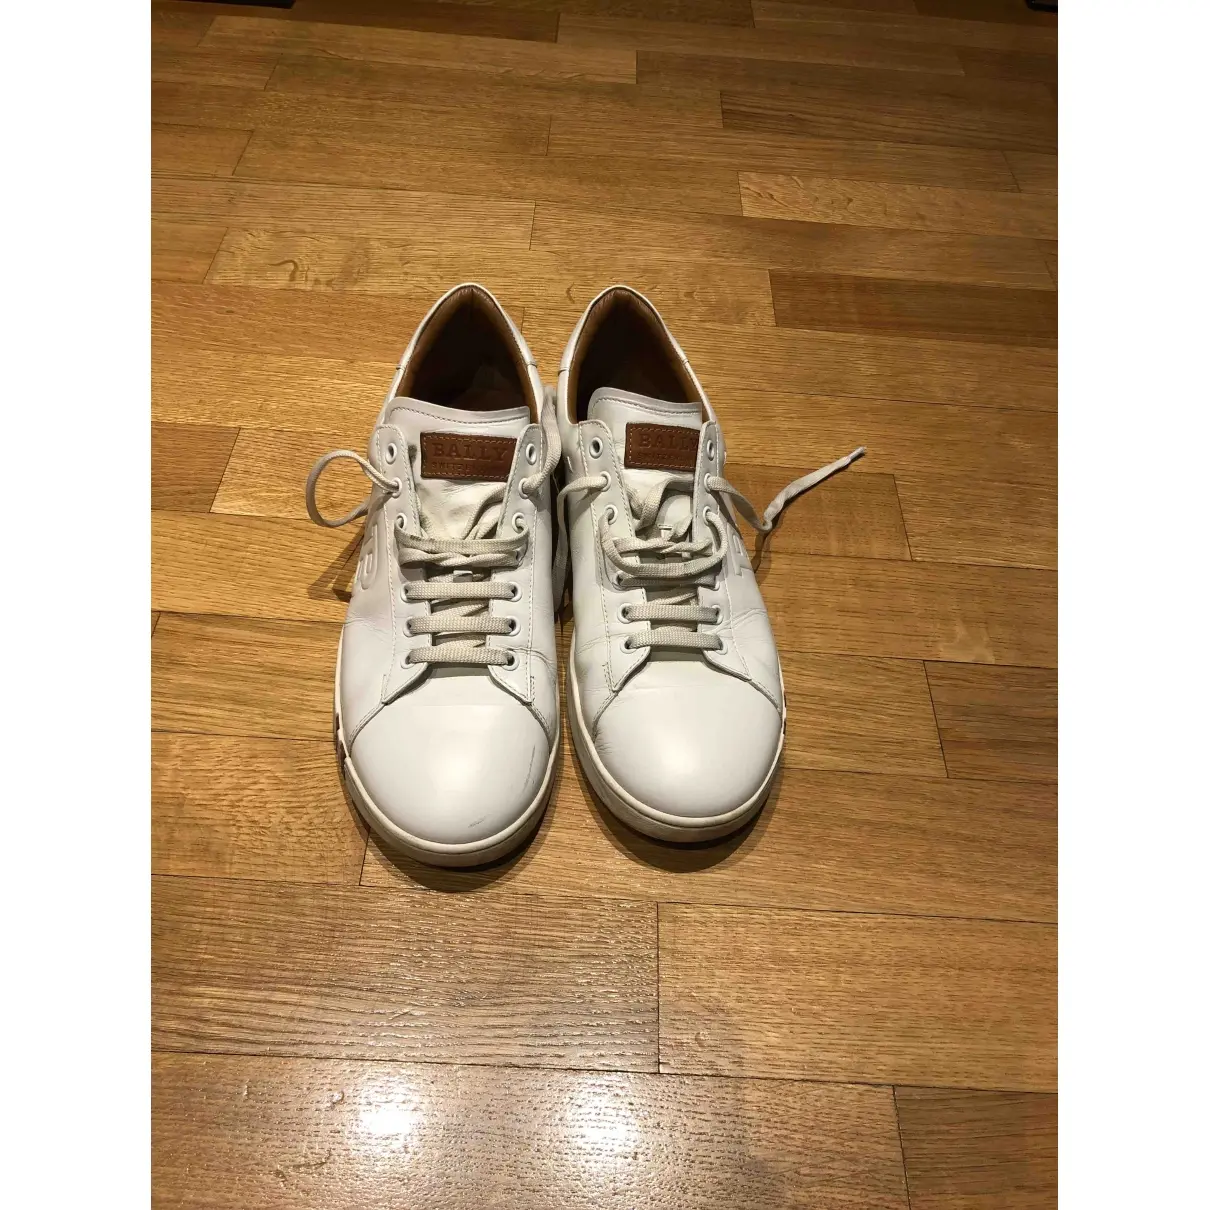 Bally Leather low trainers for sale